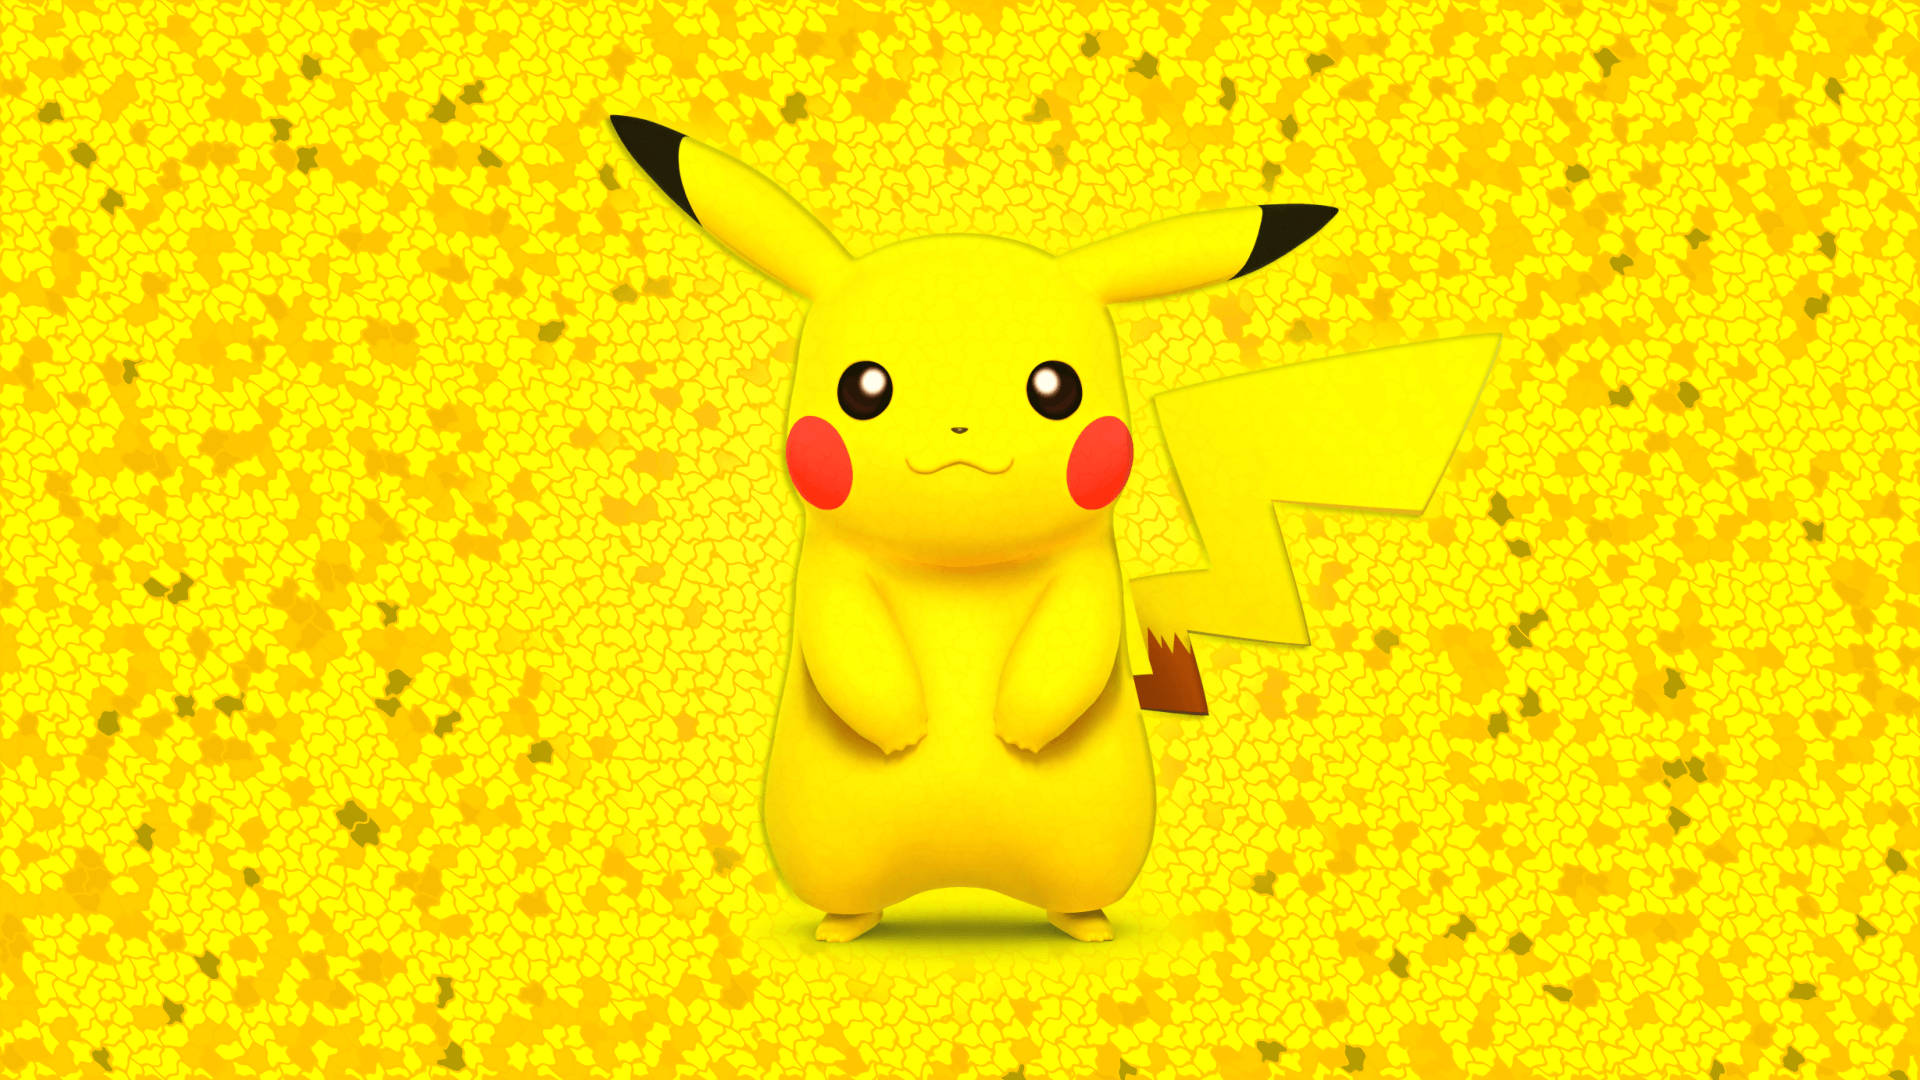 Endearing Pikachu in Collage Wallpaper